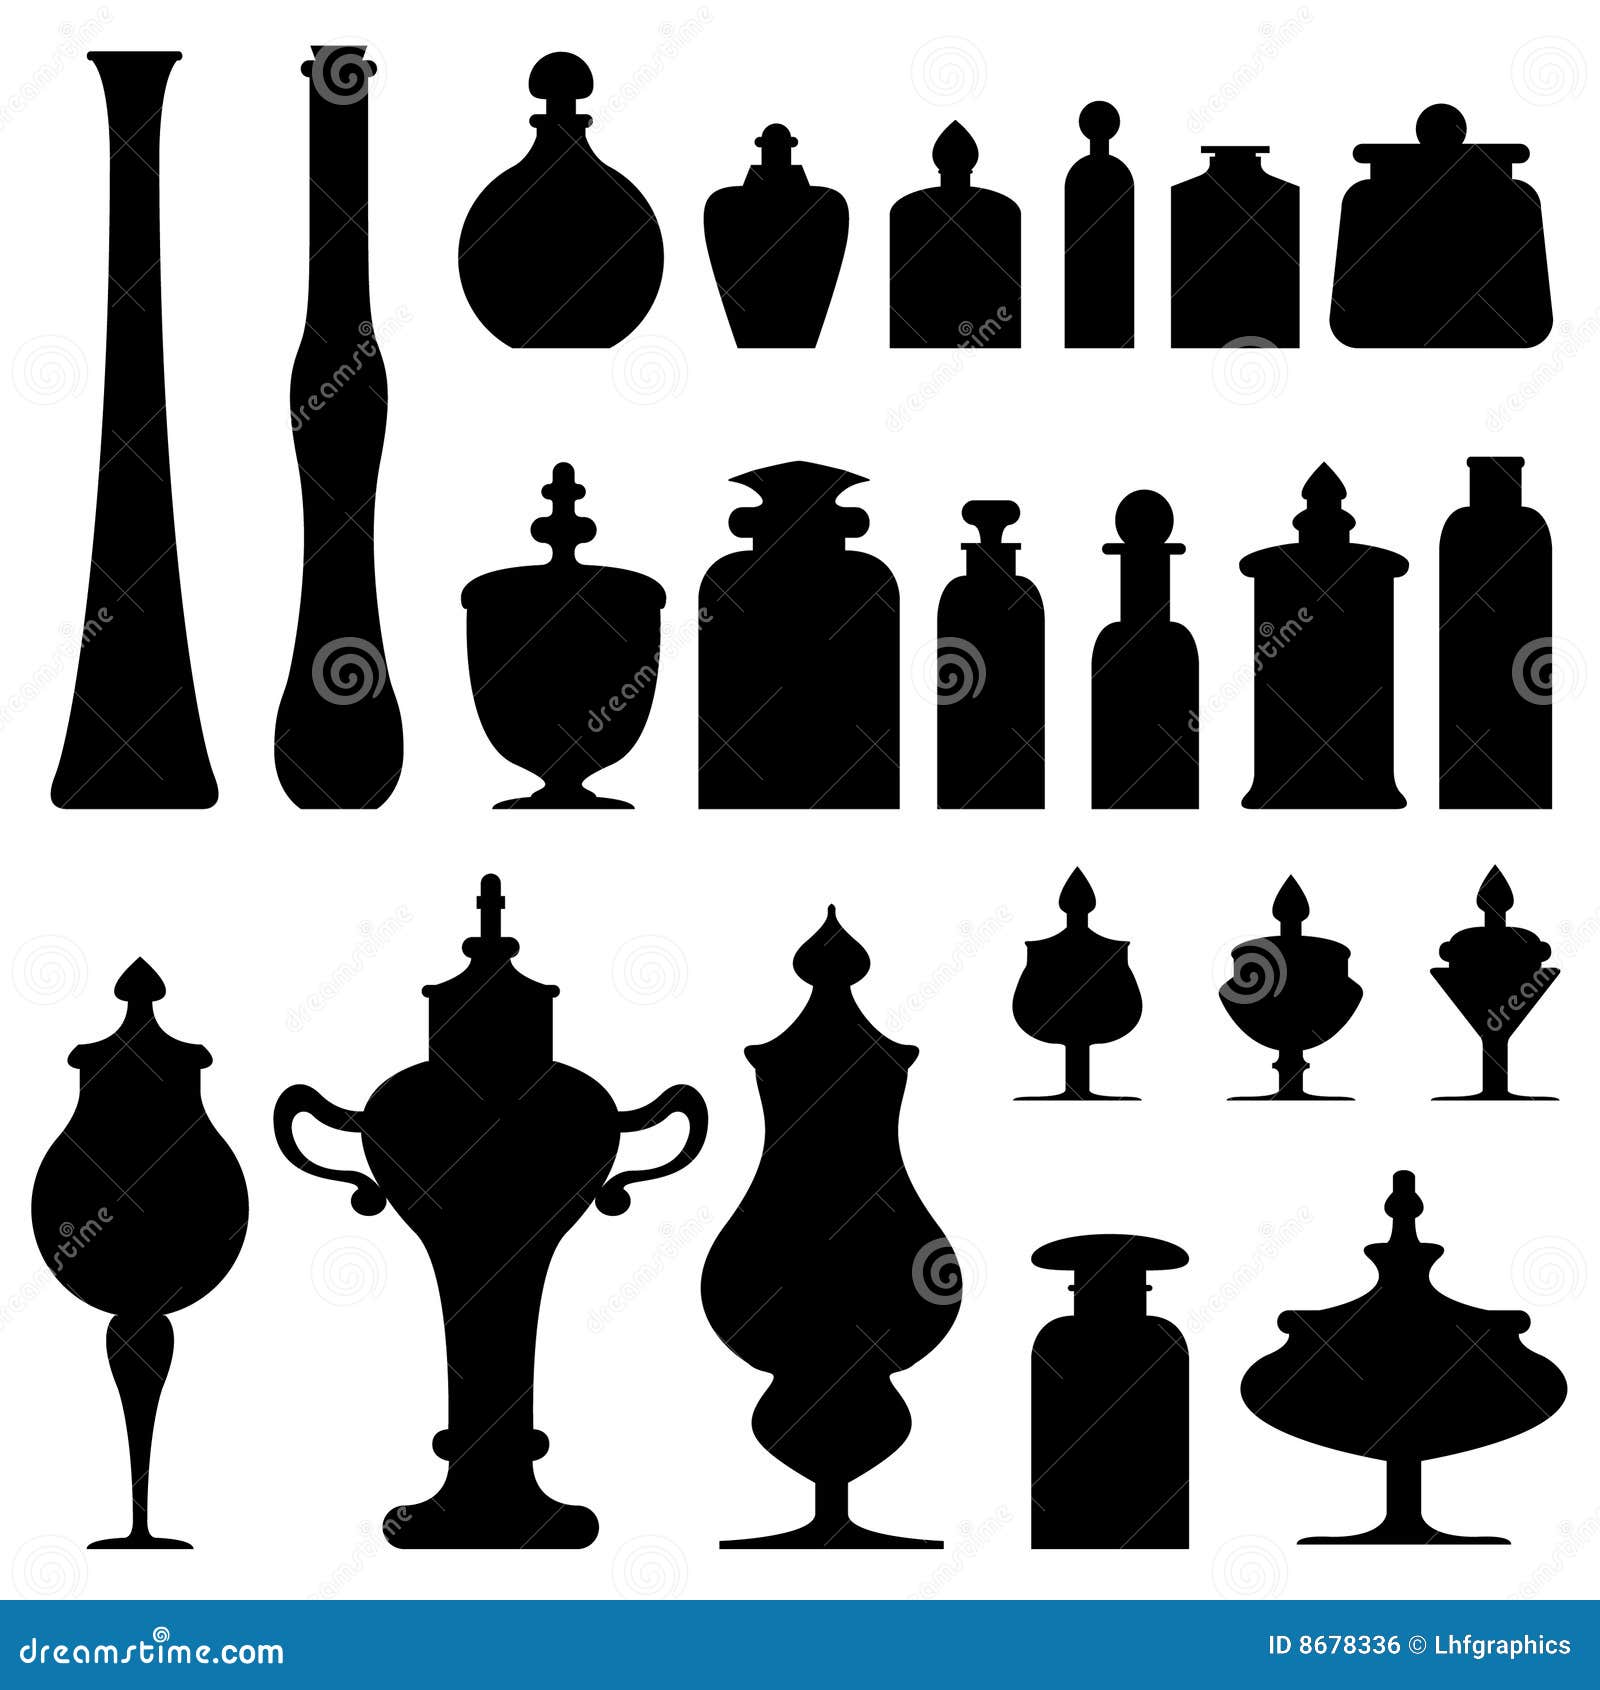 bottles, jars, and urns from apothecary or herbali